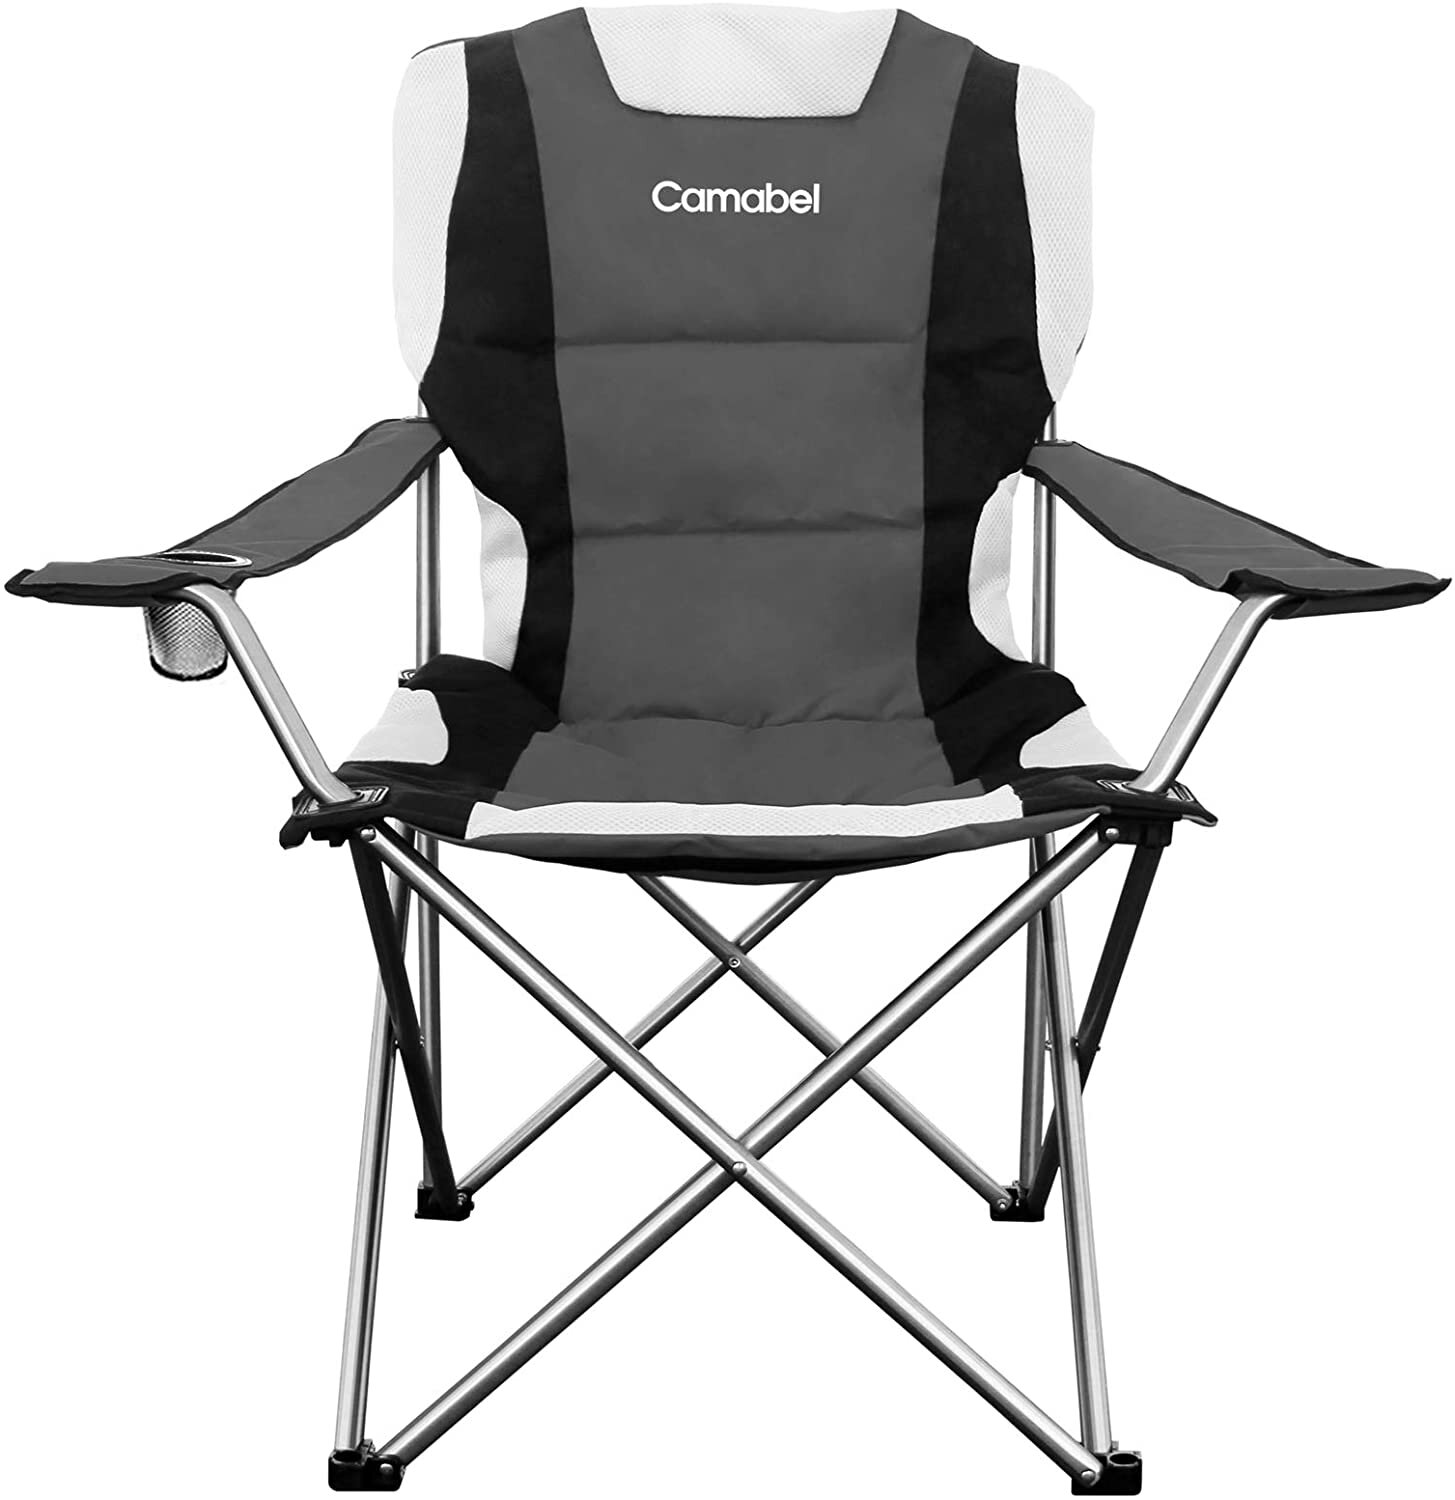 Camabel Folding Camping Chairs Outdoor Lawn Chair Wayfair